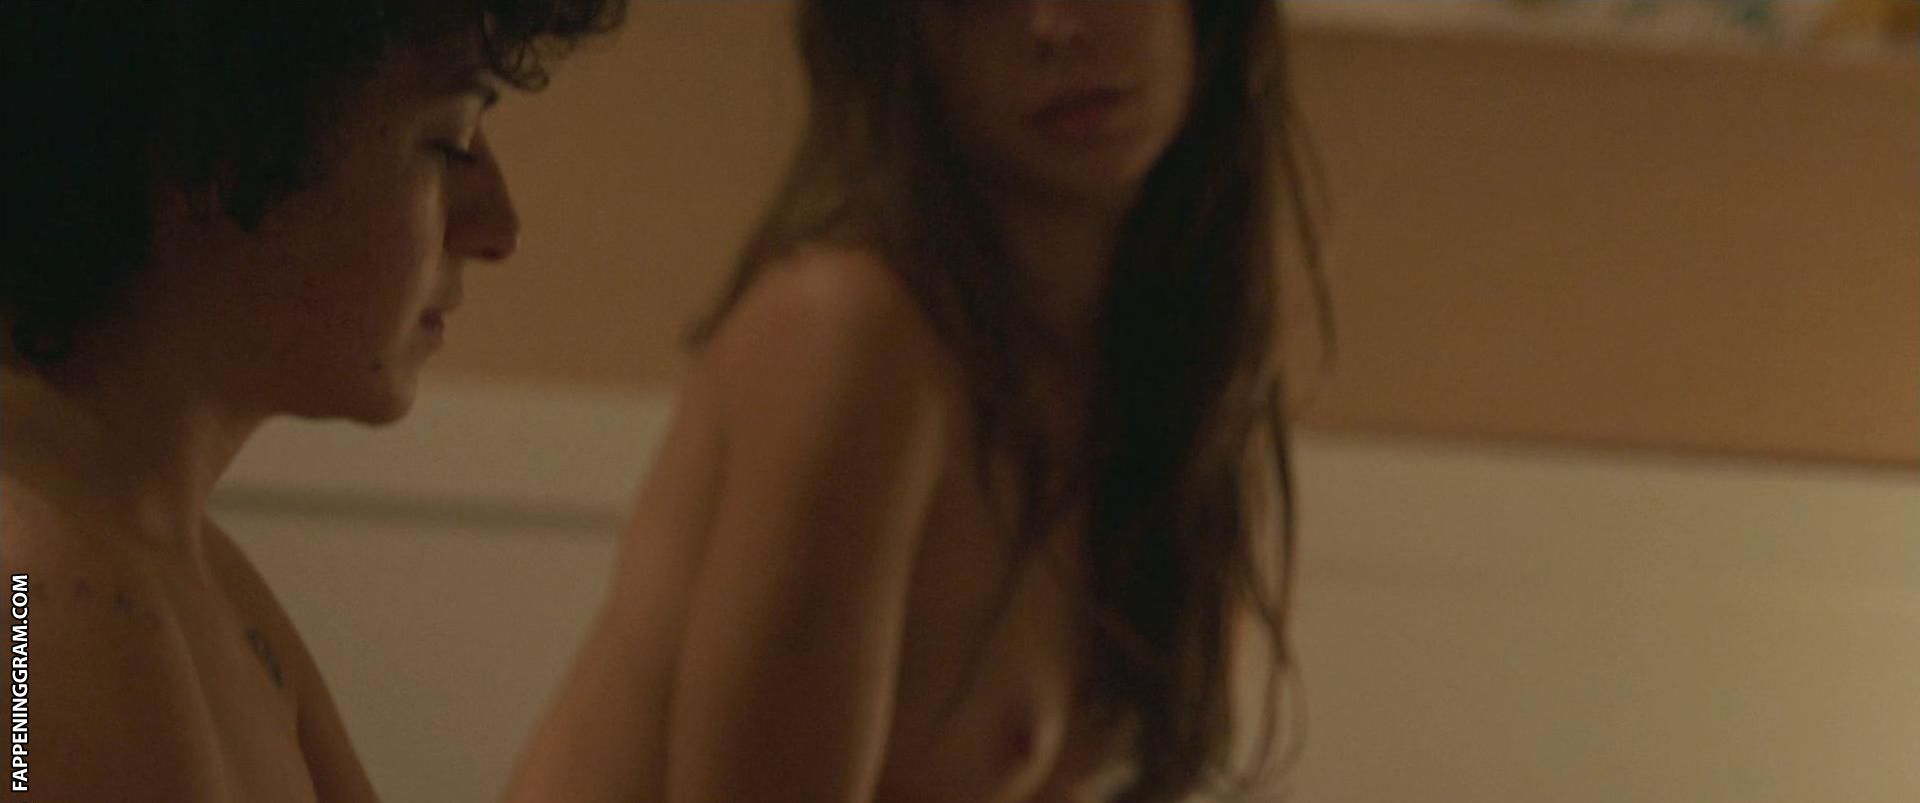 Laia costa naked